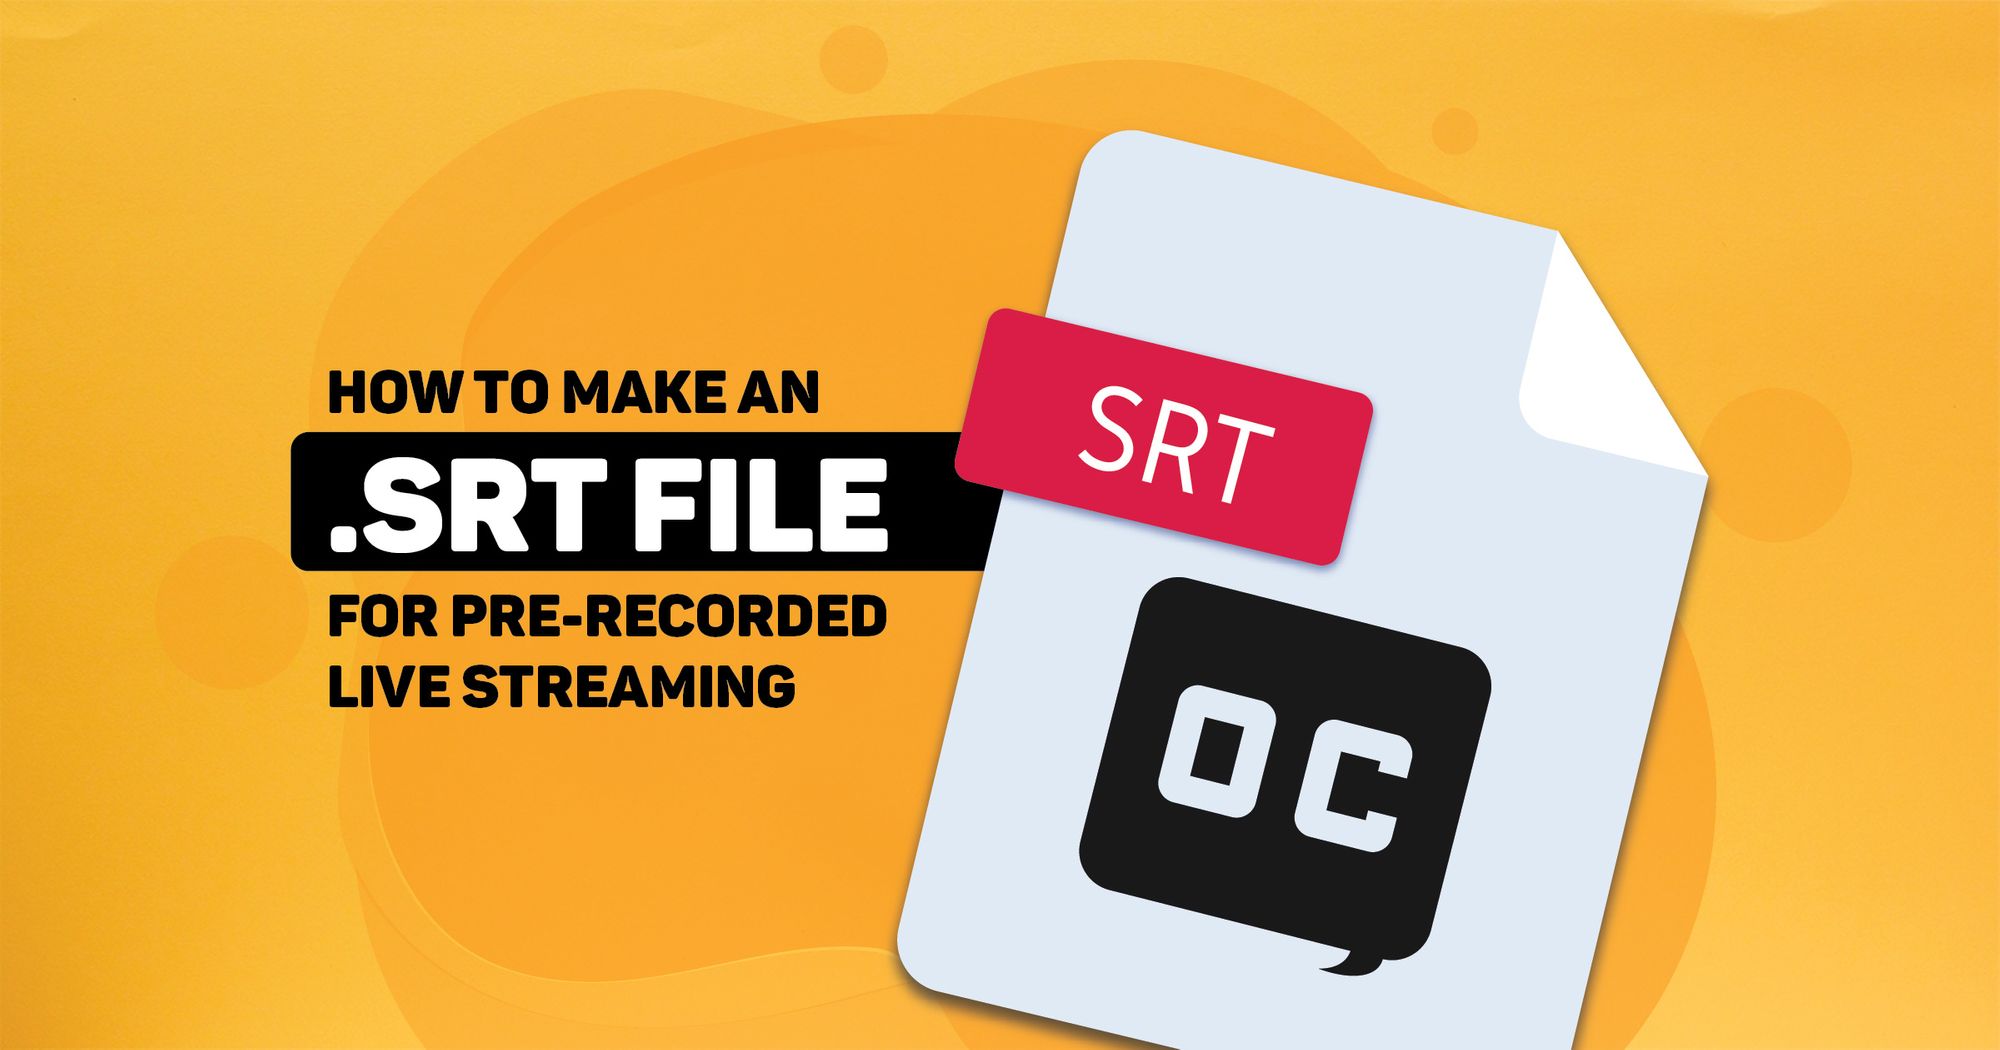 How to Make an SRT File for Pre-Recorded Live Streaming